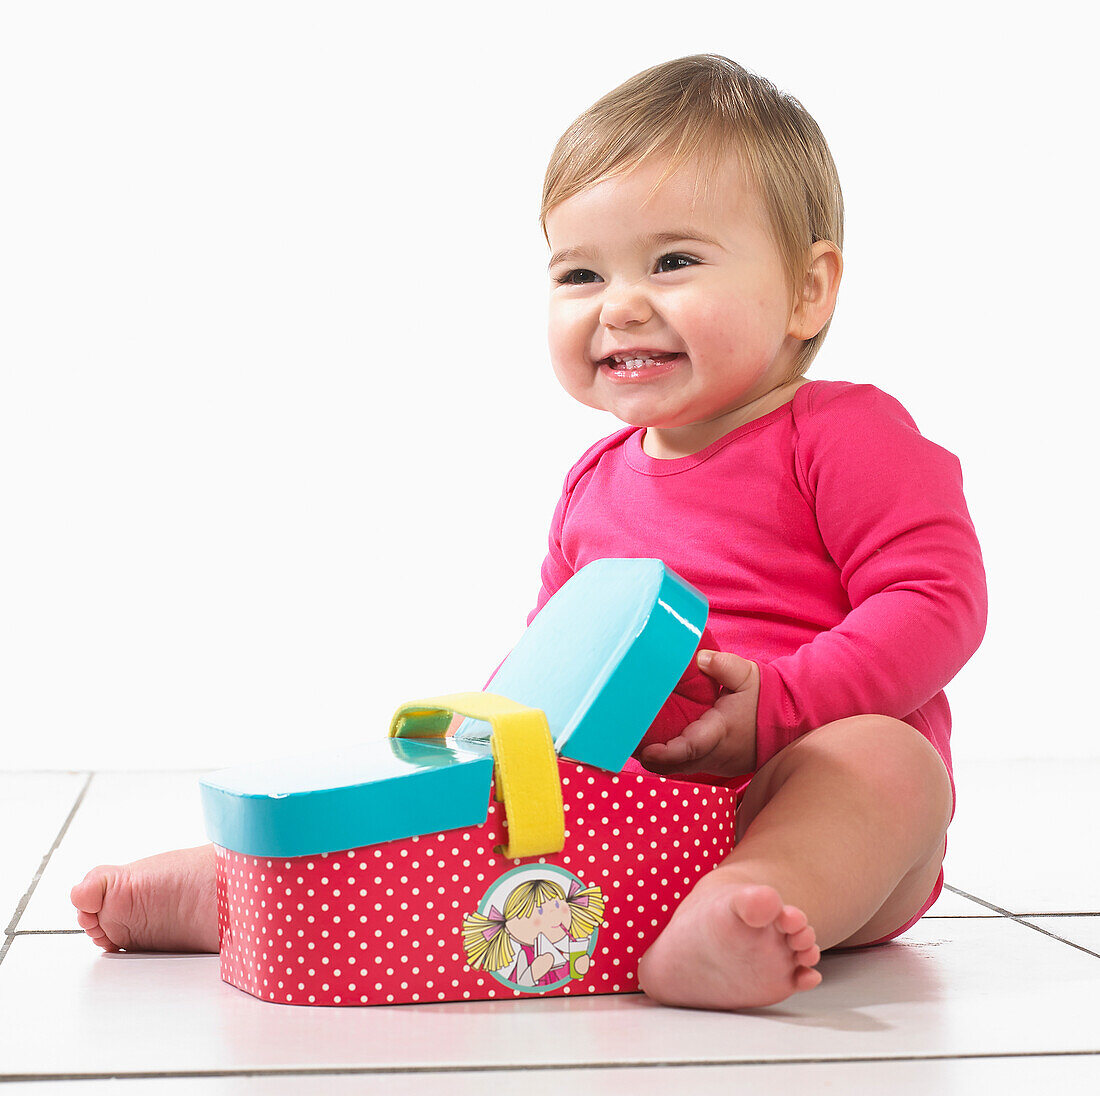 Baby girl sitting playing with toy picnic basket